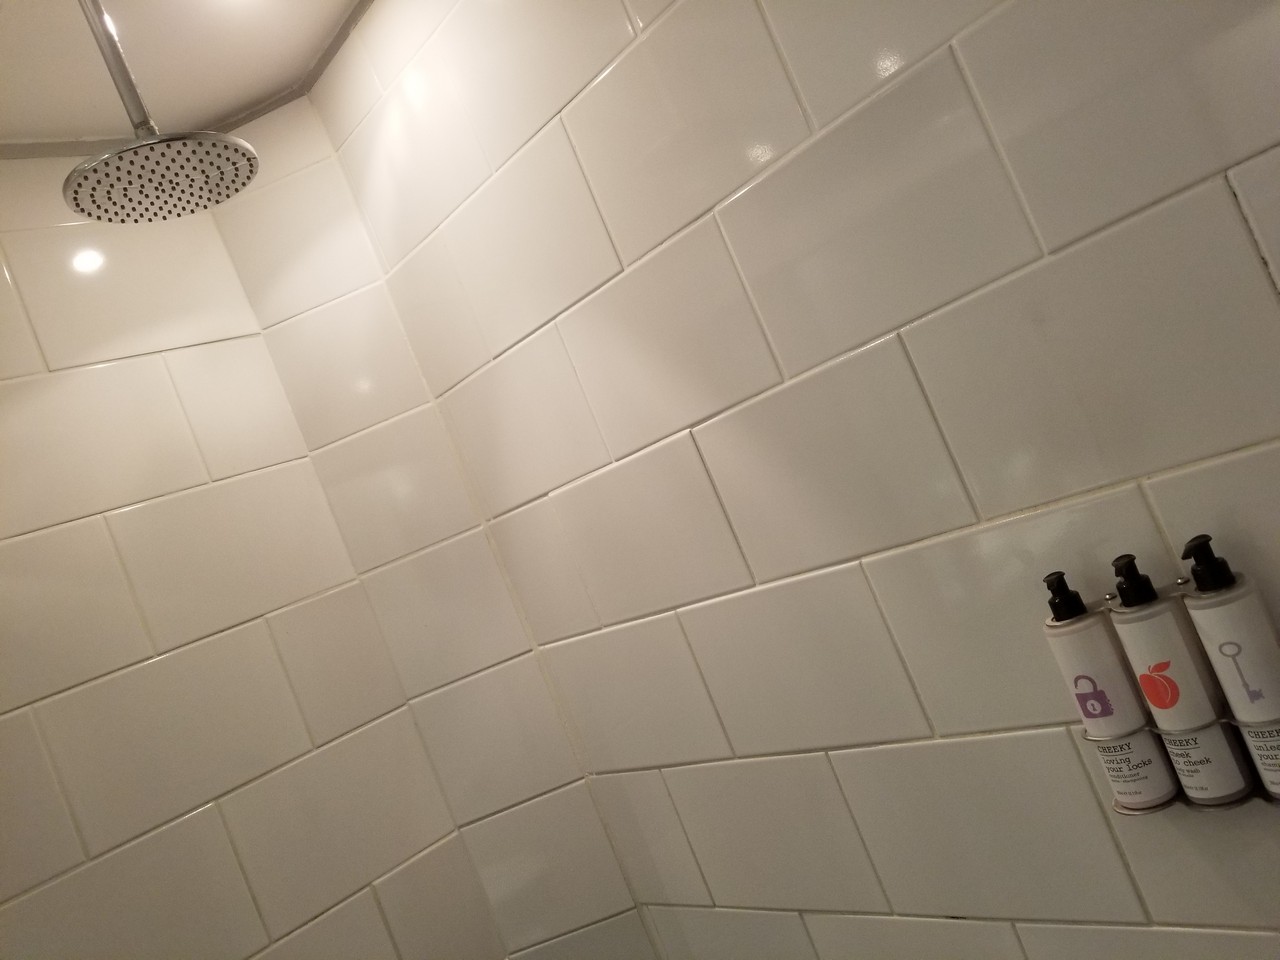 a shower head with a shower head and a spray can